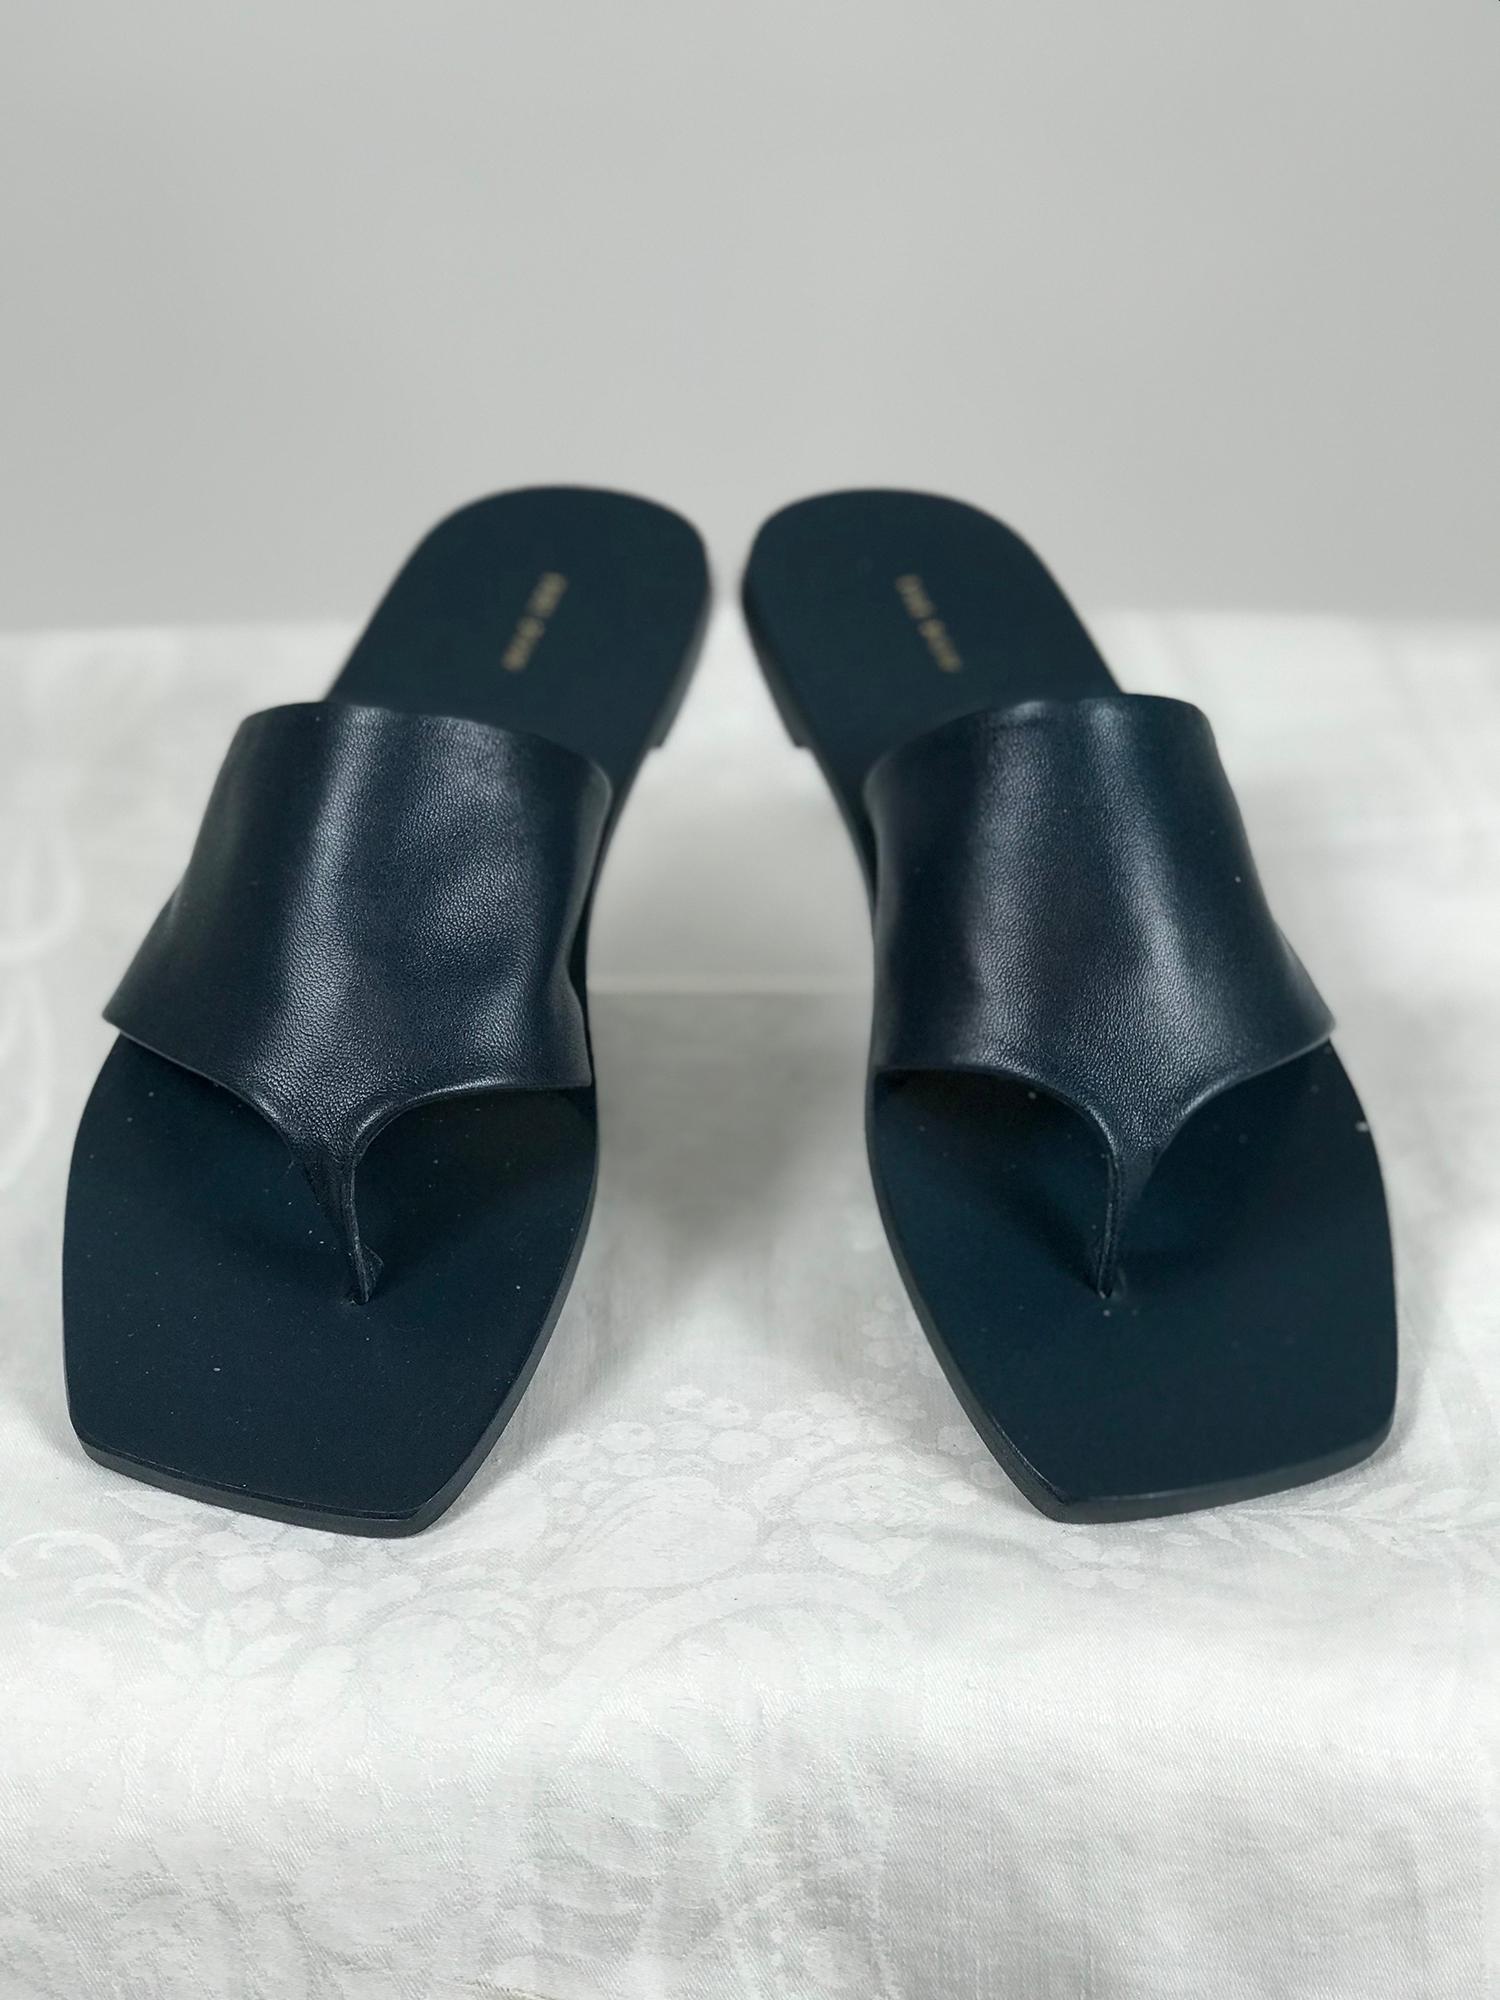 The Row flip flop flat sandal in teal (dark blue) glove soft nappa leather.
These sandals are unworn and in the box. Original tagged price $690.  Marked size 7B. 
